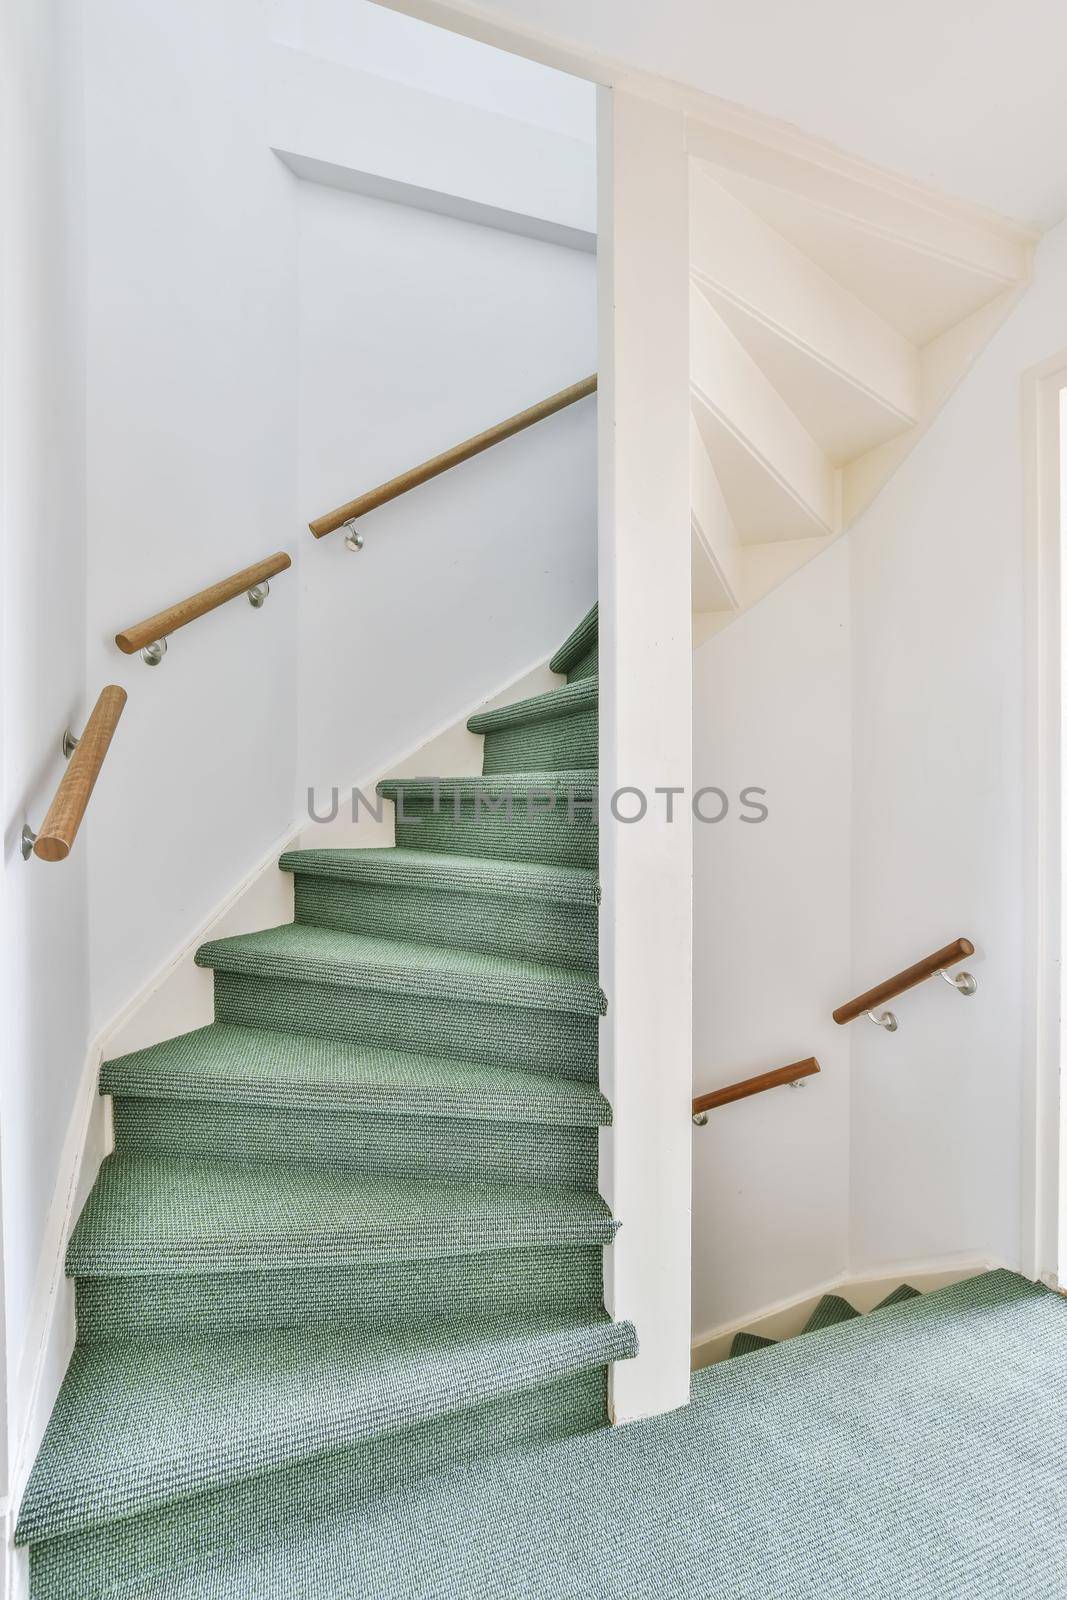 Gorgeous staircase with a gentle green floor